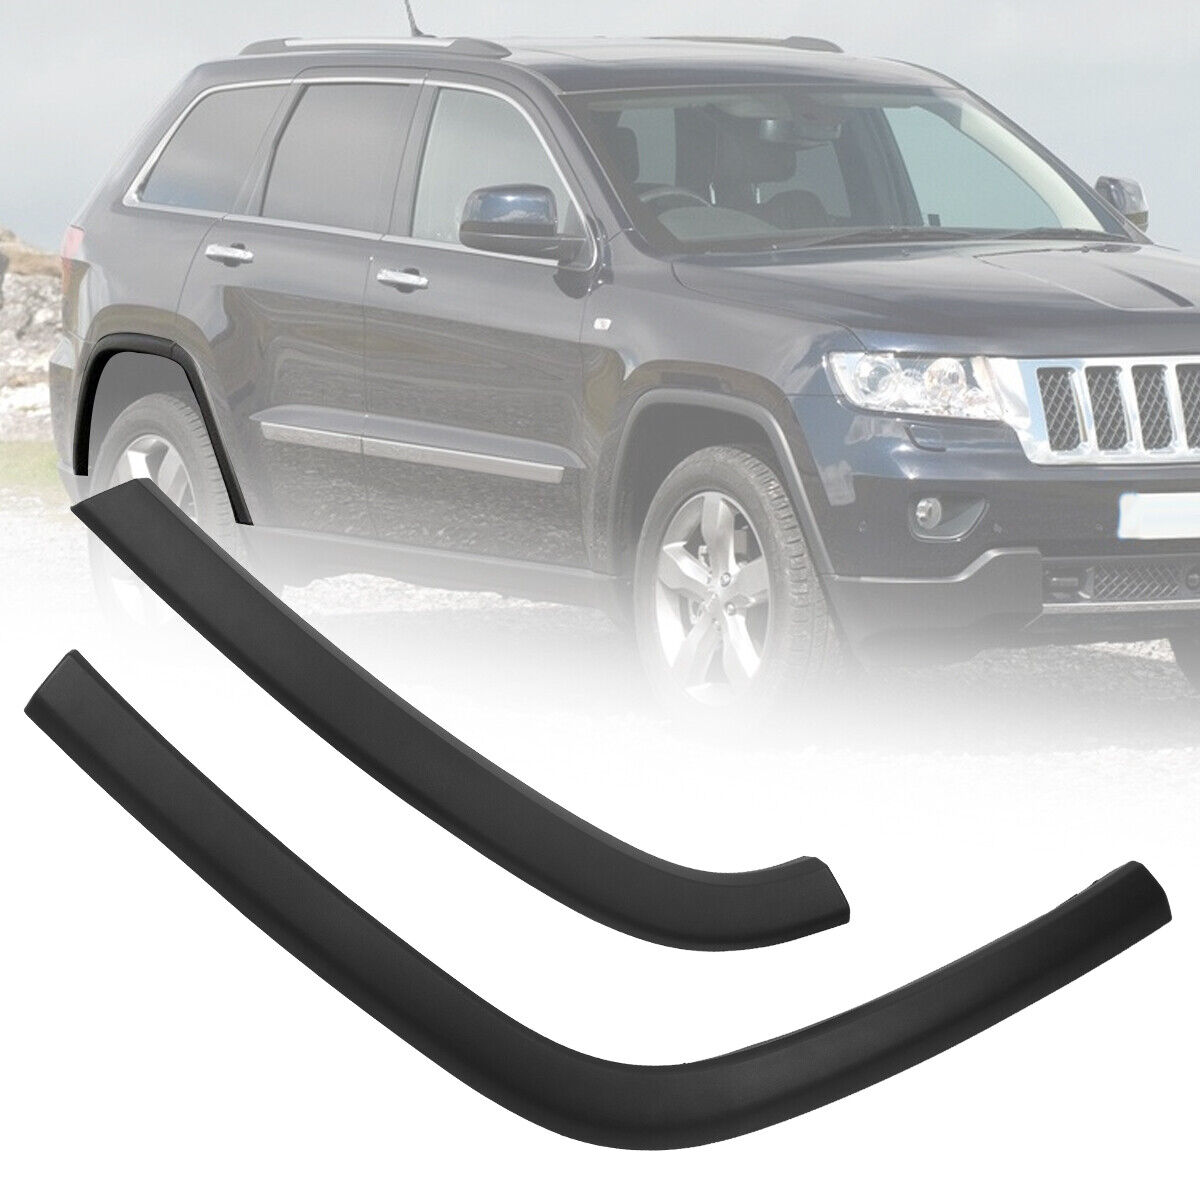 Rear Right Passenger Side Wheel Arch Trim Mold For Jeep Grand Cherokee 2011-2021